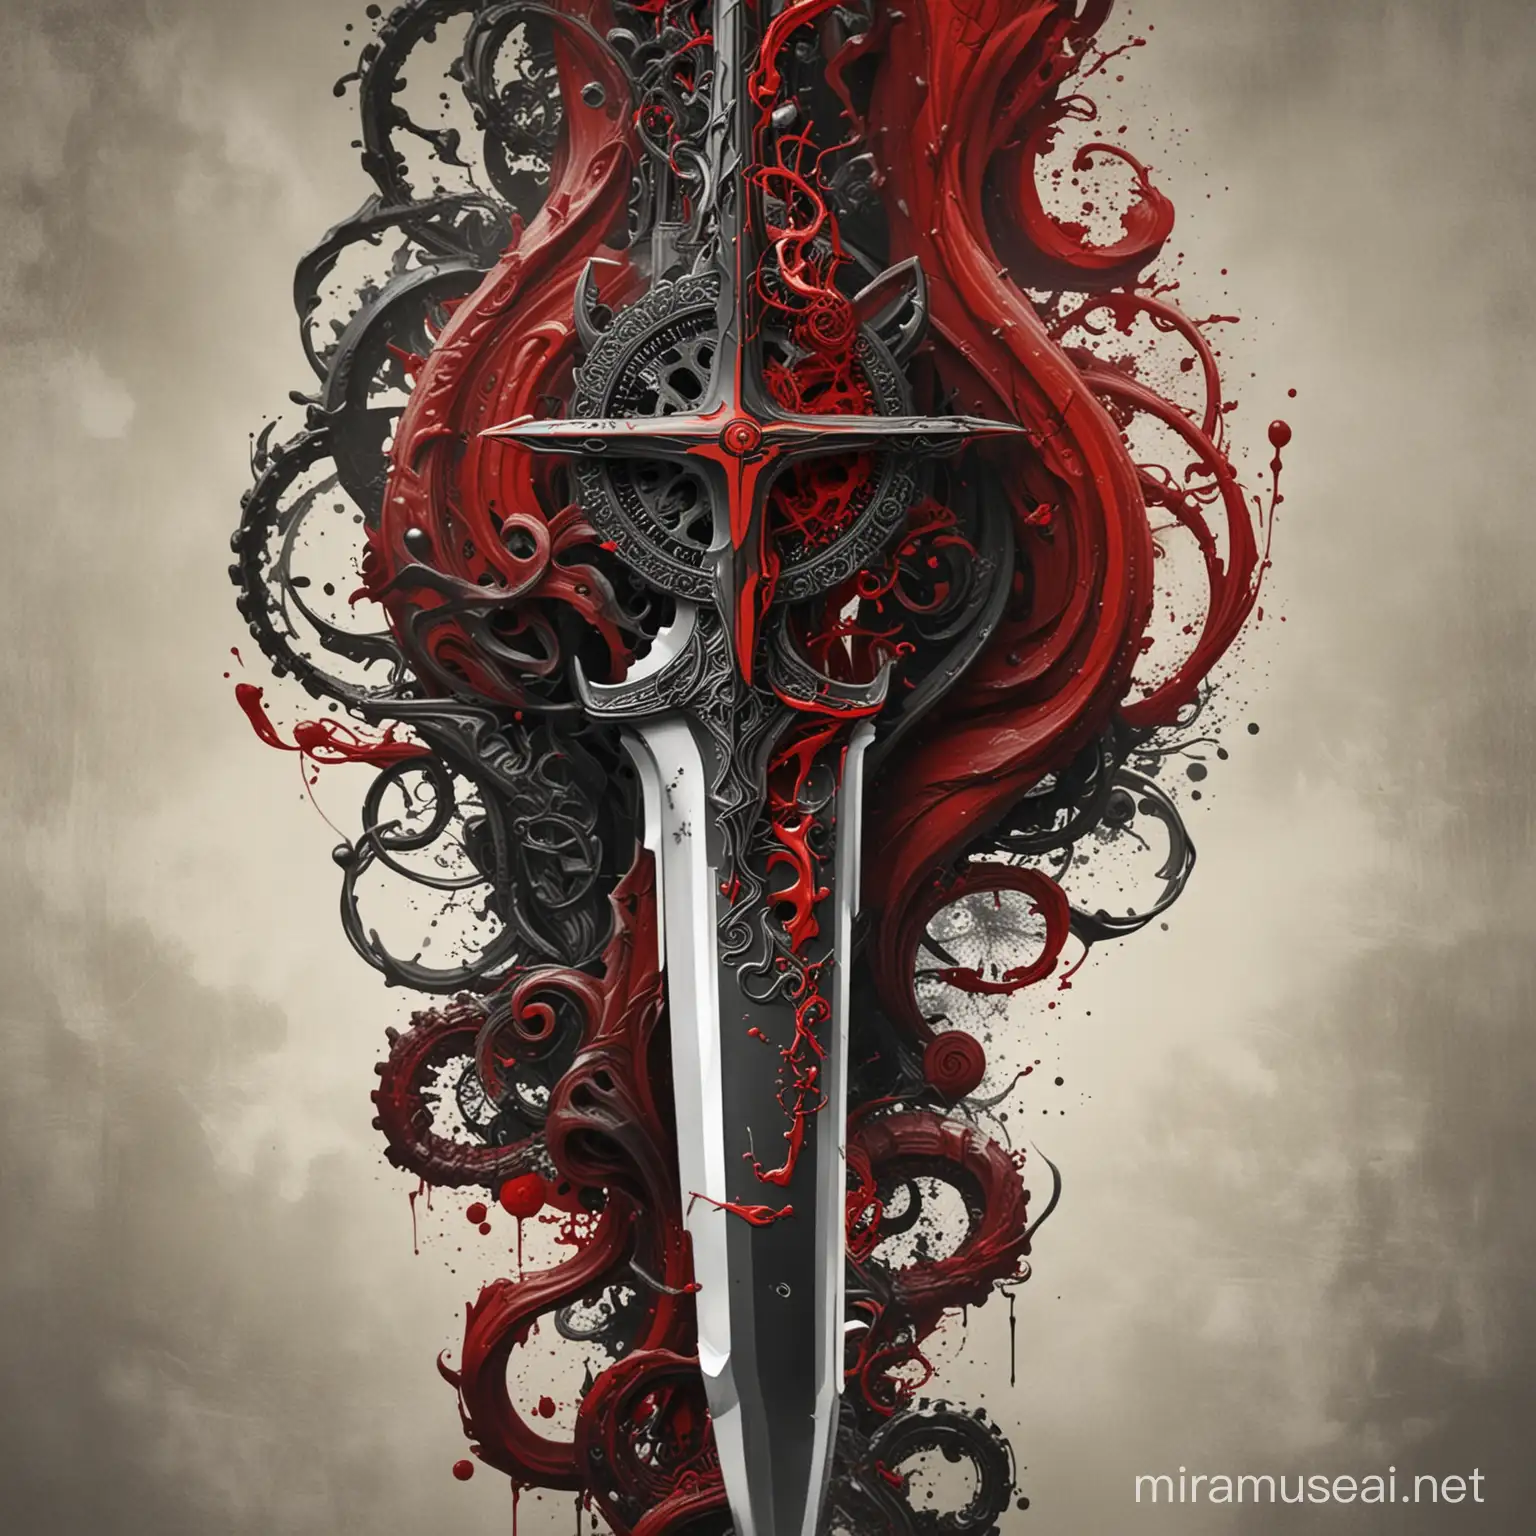 Chain, symbolizing inner slavery.
Dagger, symbolizing internal conflicts.
Mask, as a representation of the hidden self.
Clock, symbolizing attachment to the past

Red and black swirling paintings depicting the storms within.
A surreal landscape, reflecting the inner chaos.
A game of shadows, symbolizing hidden demons.
Typography highlighting the title "Inner Demons".